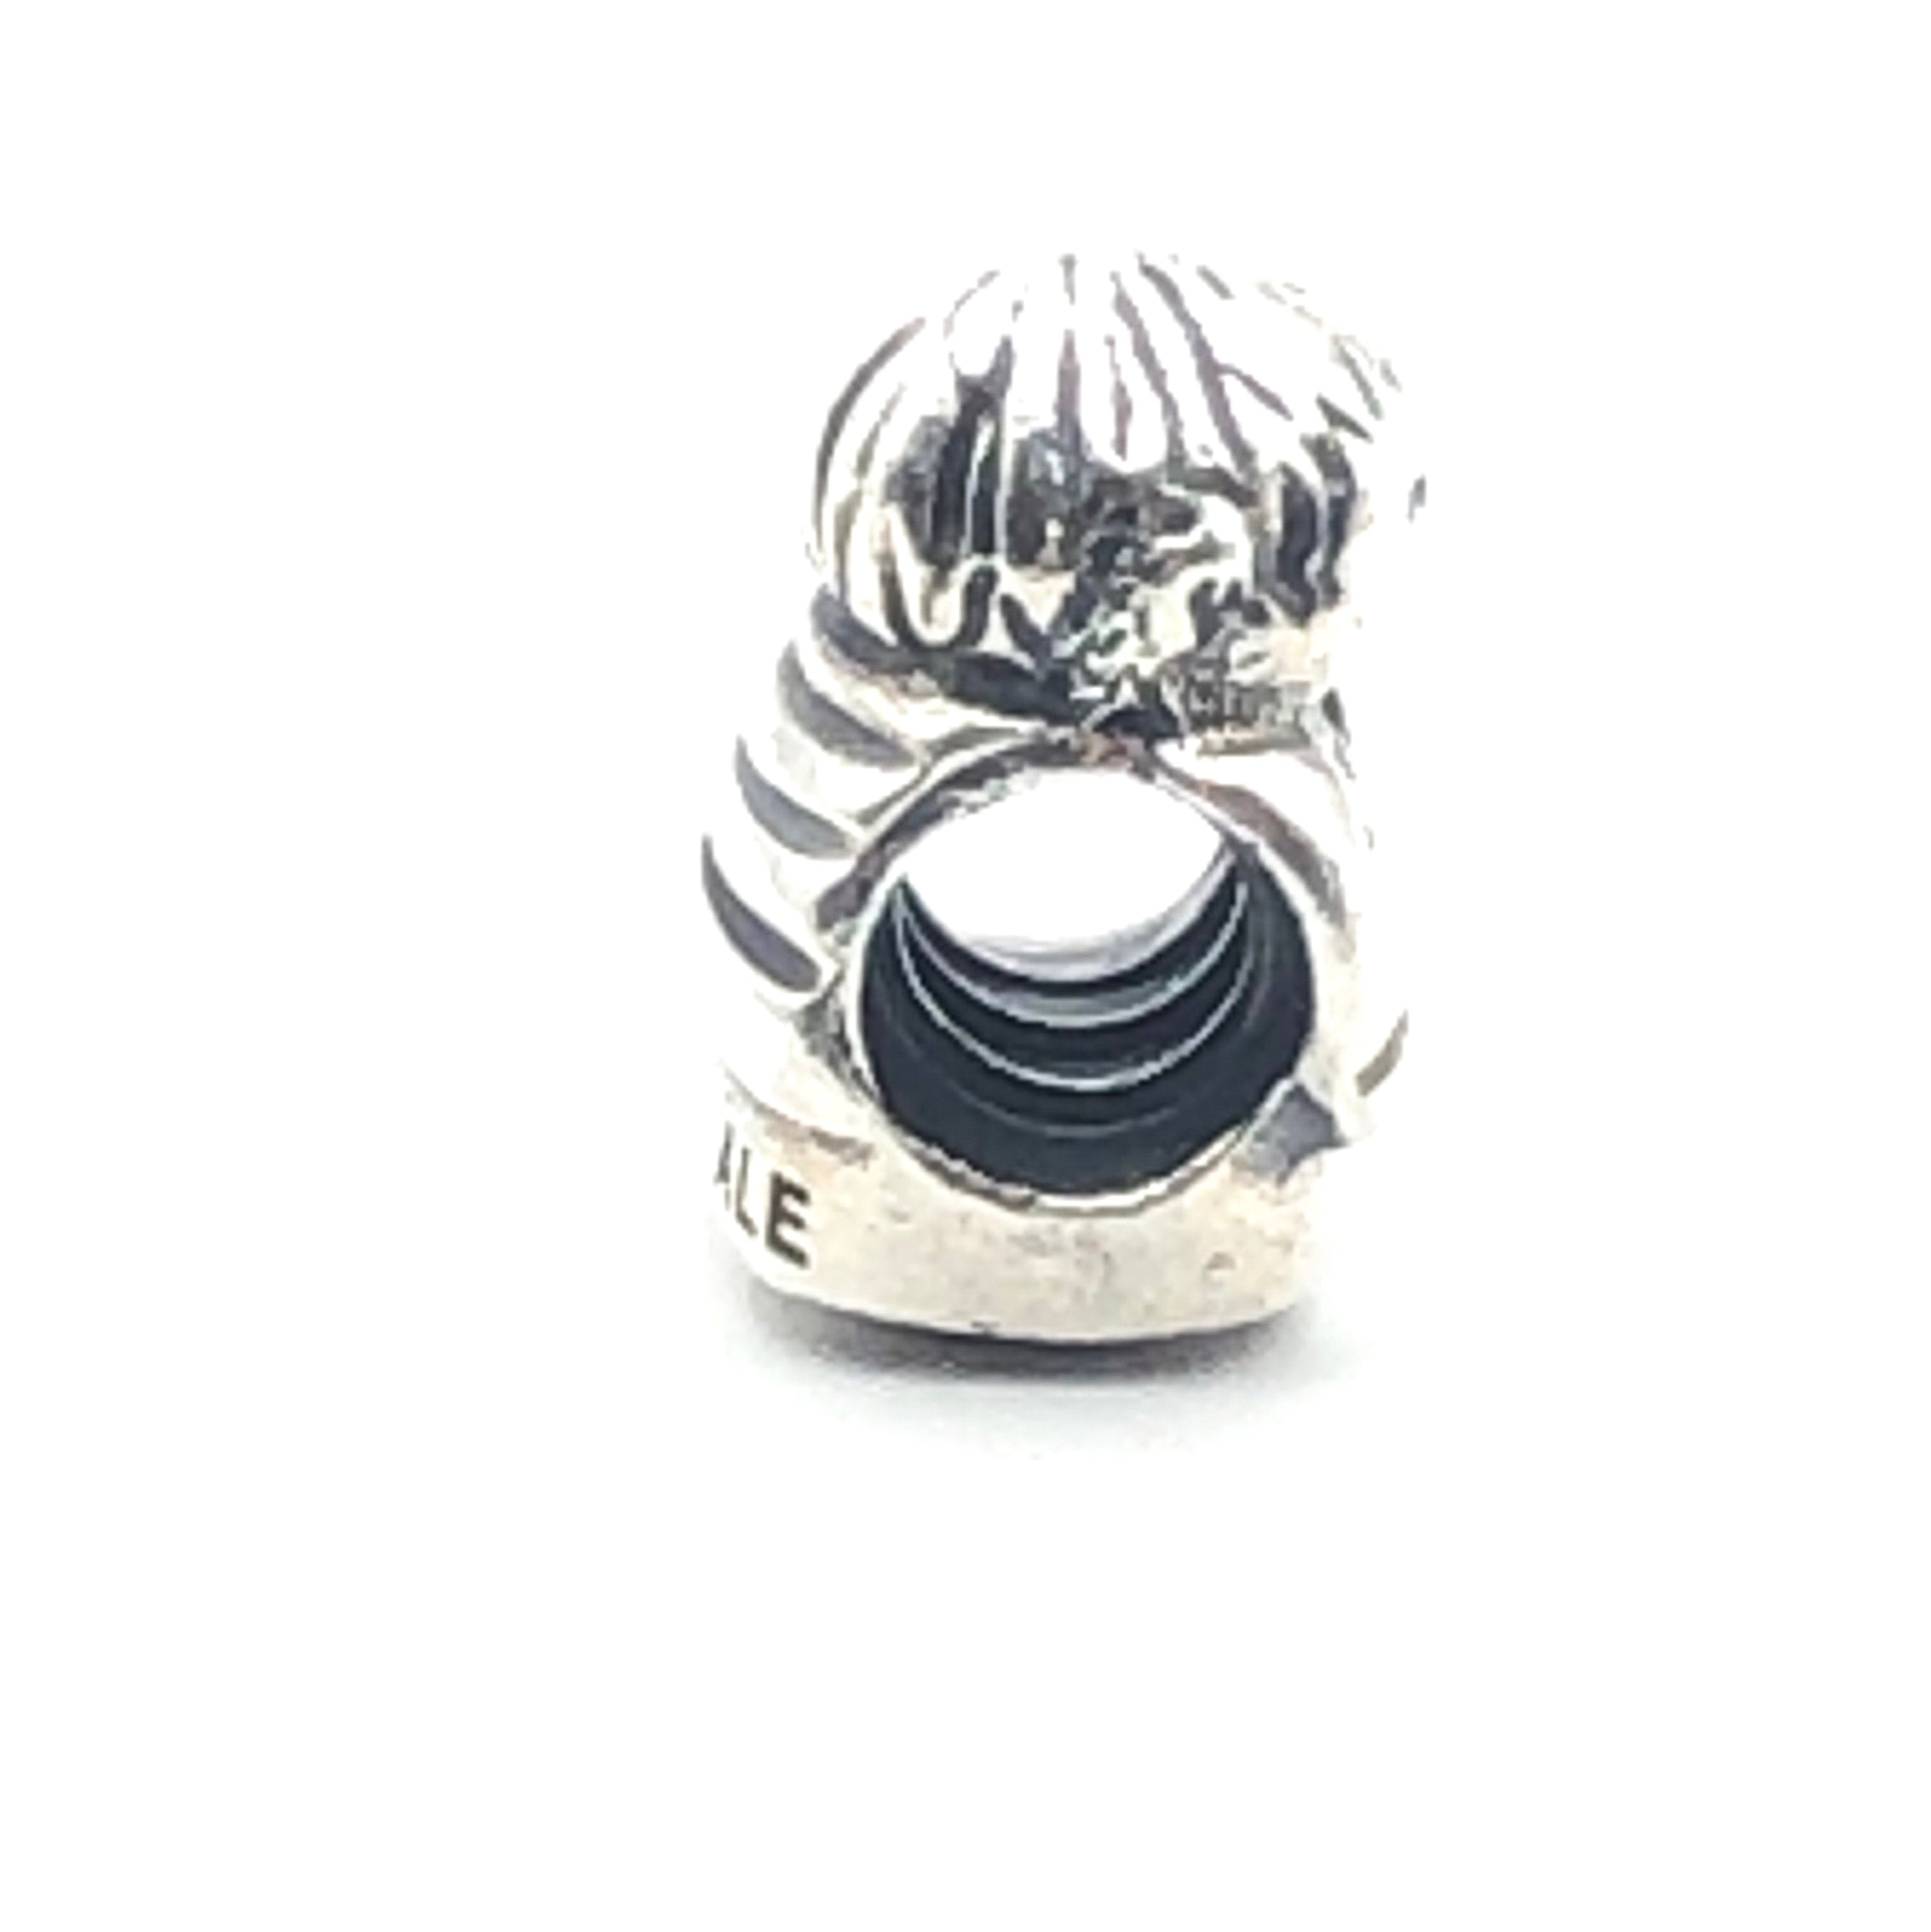 PANDORA Boy 925 ALE Sterling Silver Charm Young Boy Family Bead 790360 - Retired